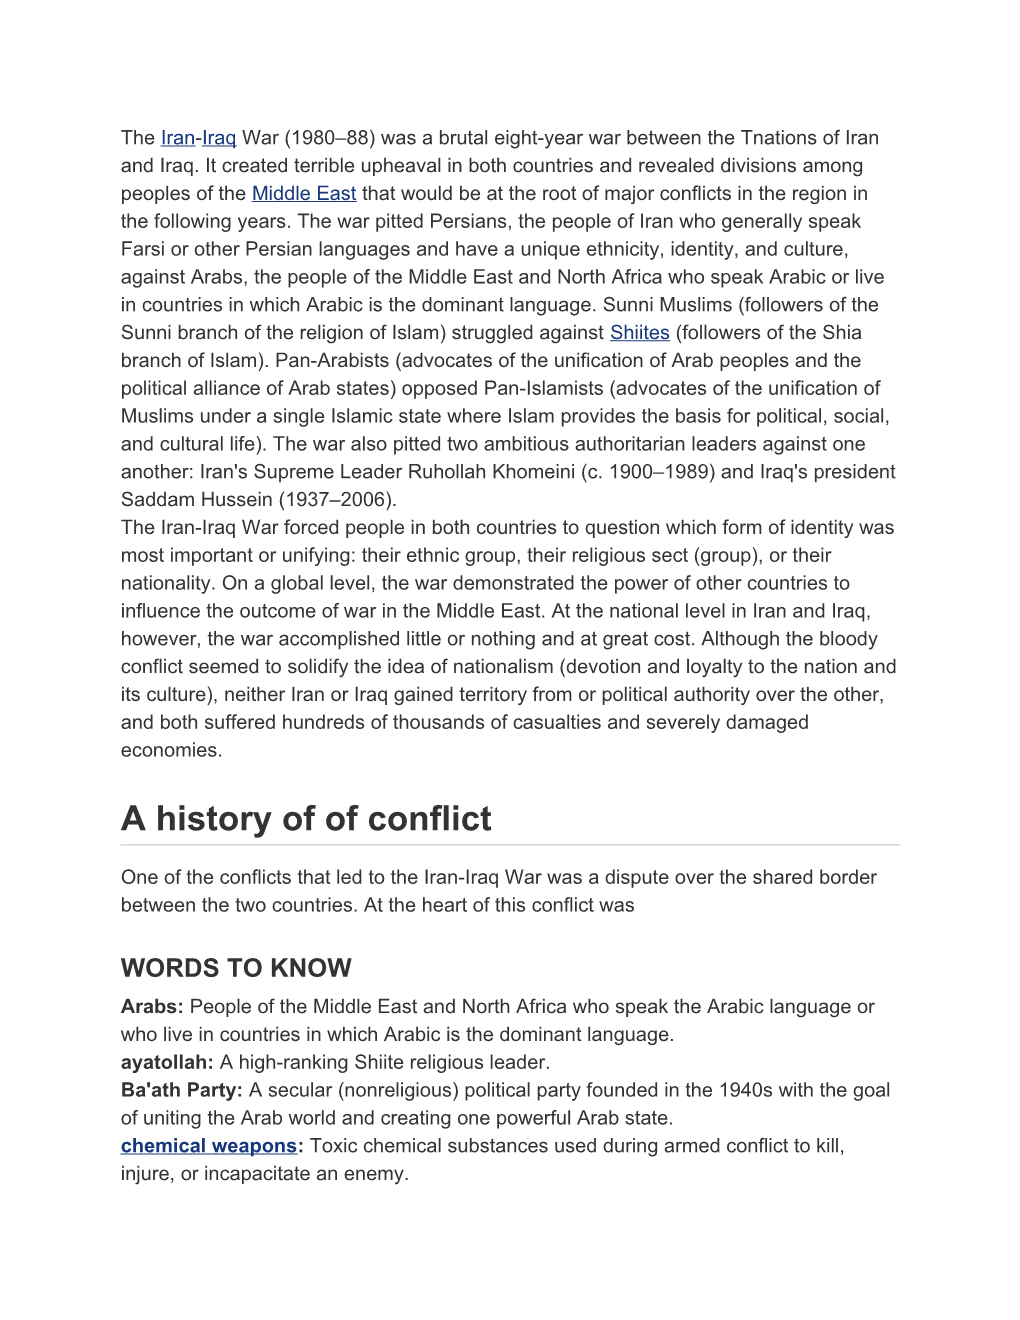 A History of of Conflict